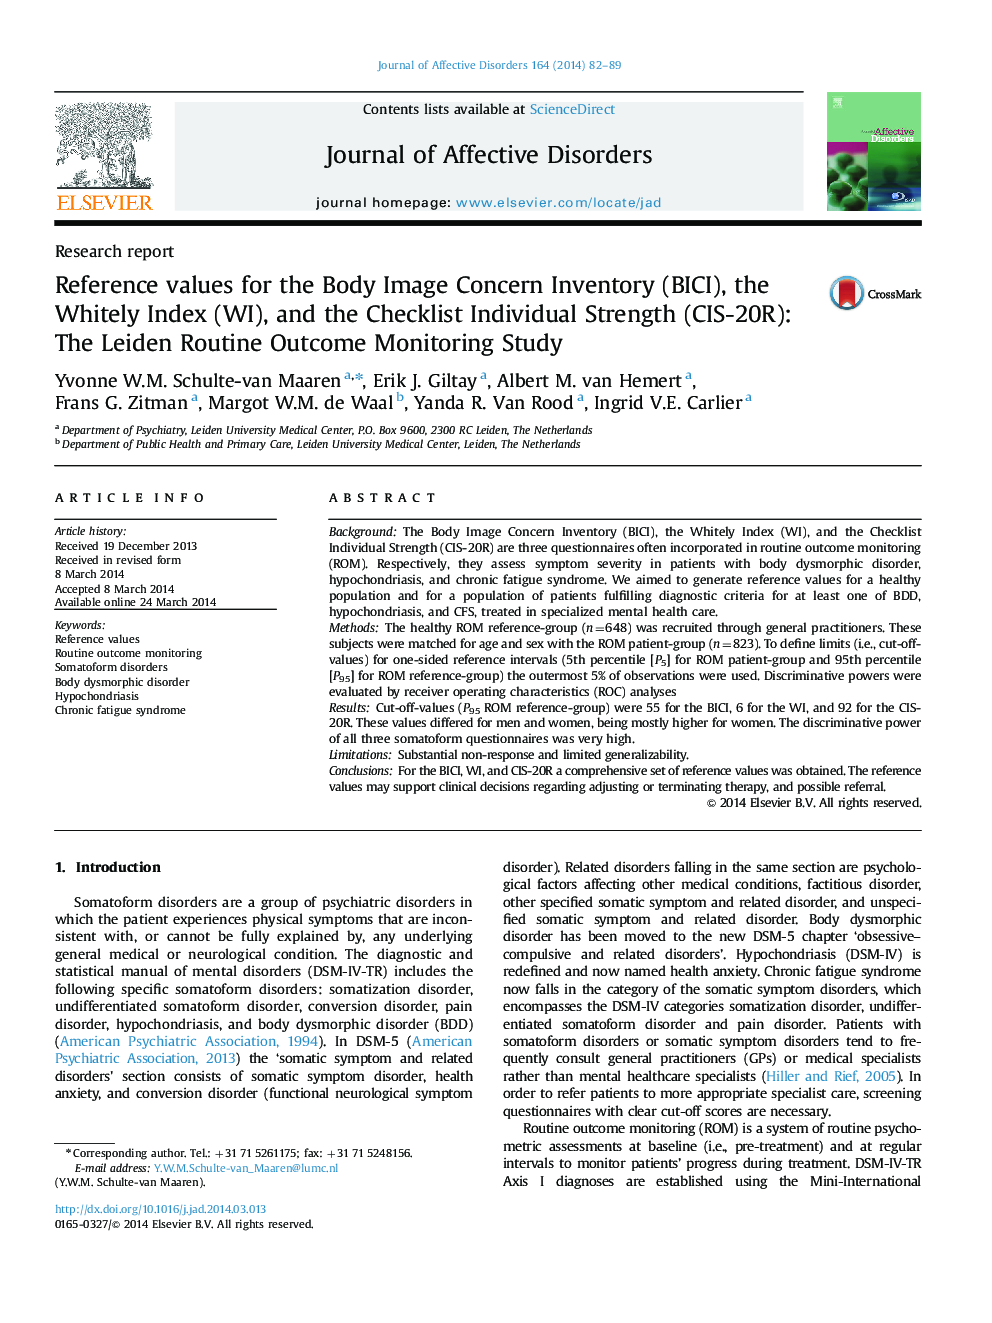 Reference values for the Body Image Concern Inventory (BICI), the Whitely Index (WI), and the Checklist Individual Strength (CIS-20R): The Leiden Routine Outcome Monitoring Study